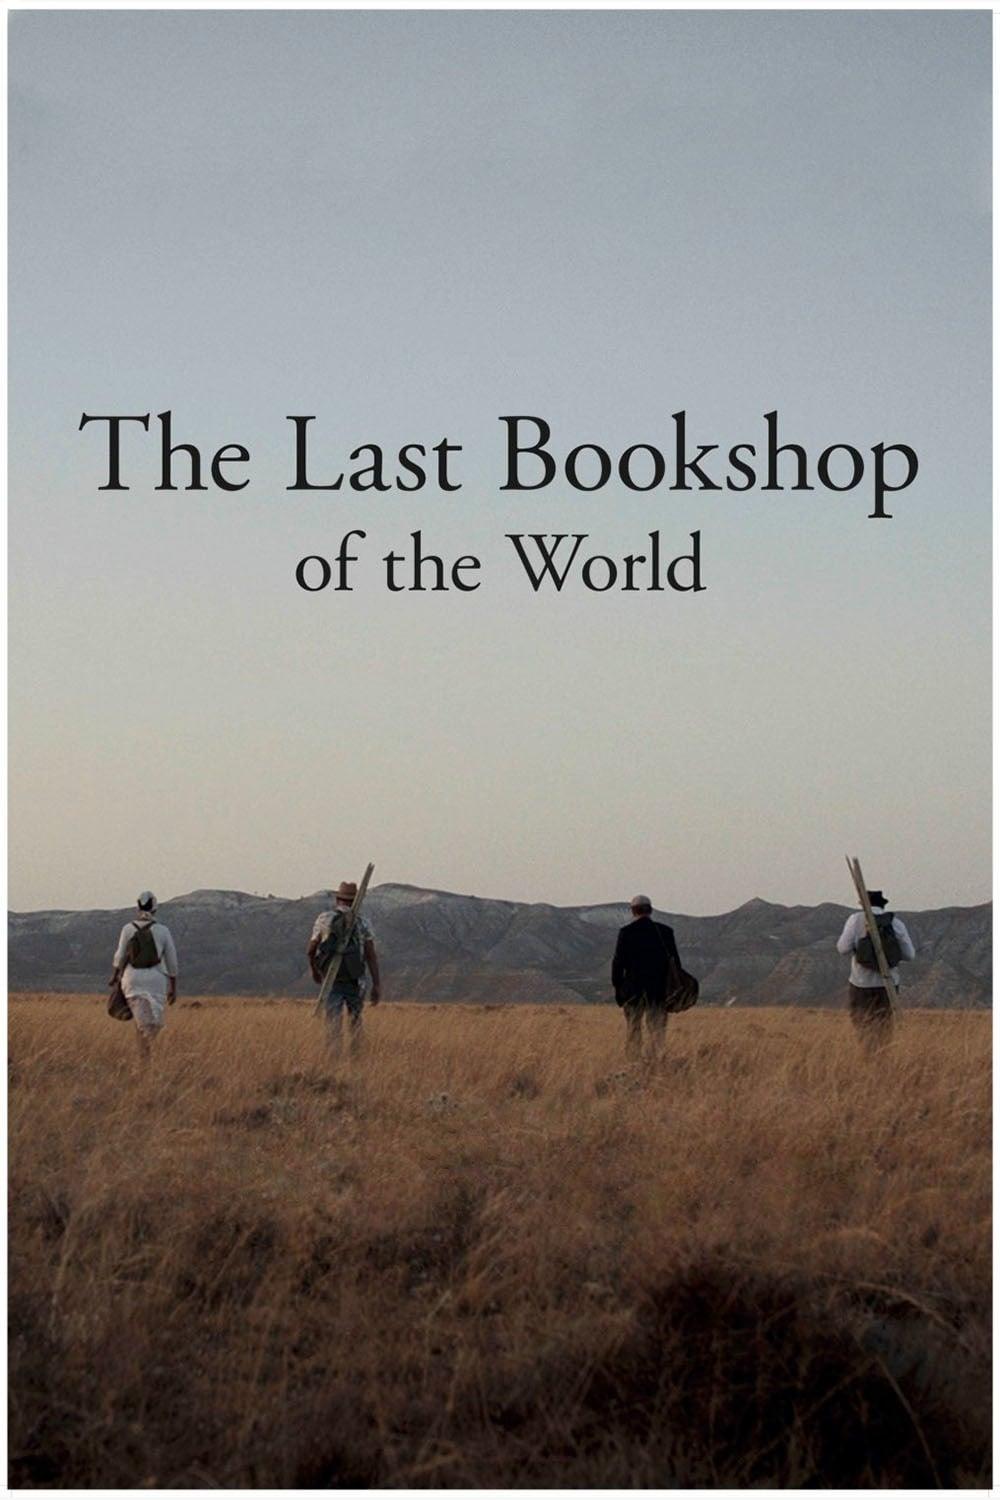 The Last Bookshop of The World poster